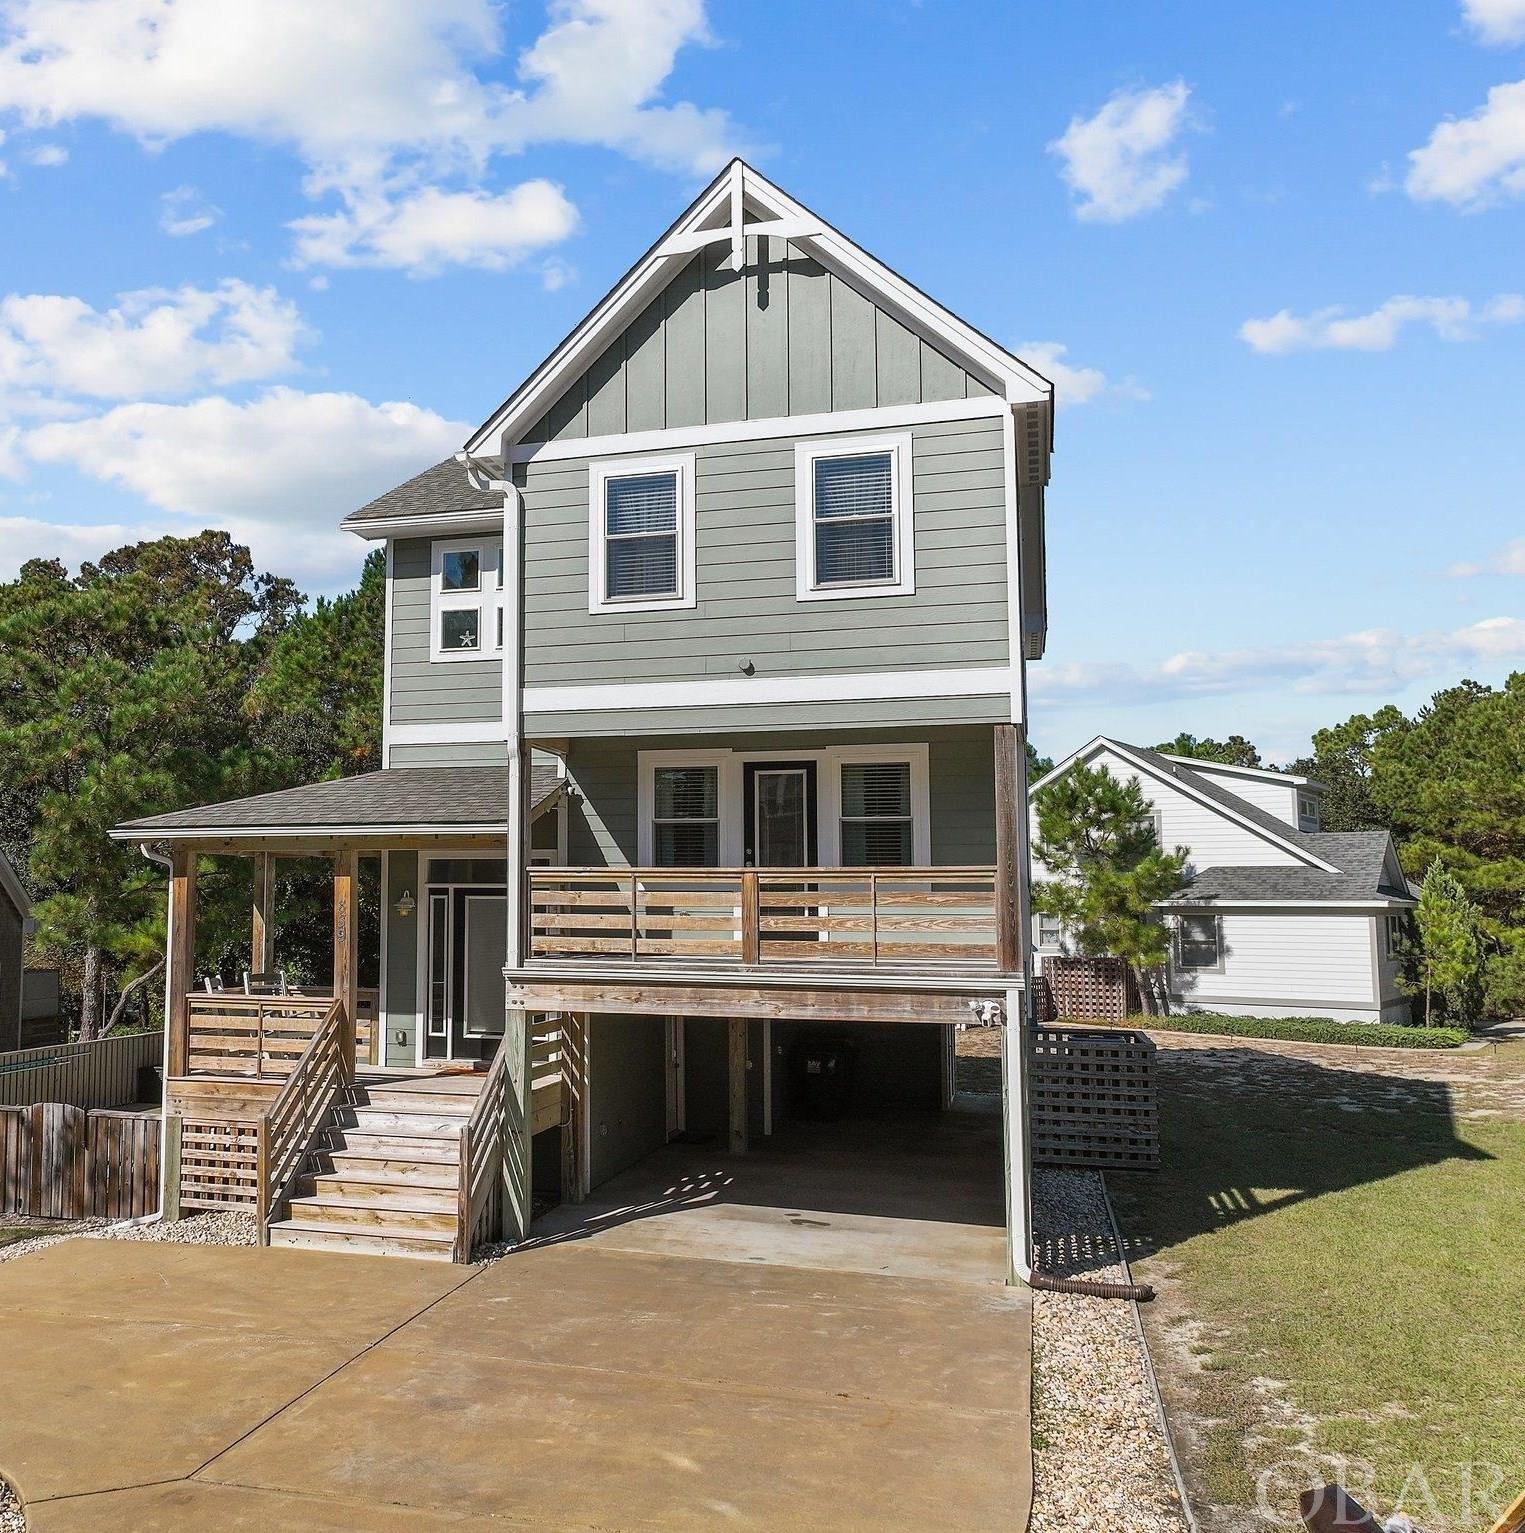 Enjoy a slice of Outer Banks heaven. This four bedroom, 3.5 bath home was professionally designed by Florez and constructed by local, Accredited Master Builder, Forrest Seal. Perfectly located, this home offers a quiet cul-de-sac setting while only being minutes from all of the Corolla attractions. With two main suites, a game room with a wet bar and half bath, this home has must-see features: an open great room and kitchen with solid honey oak flooring; Navejo white granite countertops, cherry stain wood cabinets, and SS appliances. The bathrooms have granite countertops. The exterior has architectural shingles, smart siding, and vinyl windows. The carport accommodates two cars. Newly installed (this Spring) gutters in front and back. There are multiple covered sun decks with basket weave lattice work that offers privacy. The community has all of the amenities: multiple piers over the sound, clubhouse, pool, gym, tennis court, playground, and boat launching ramp. Only a short walk or bike ride to the beach, this house works as a second home, a primary residence or a vacation rental.